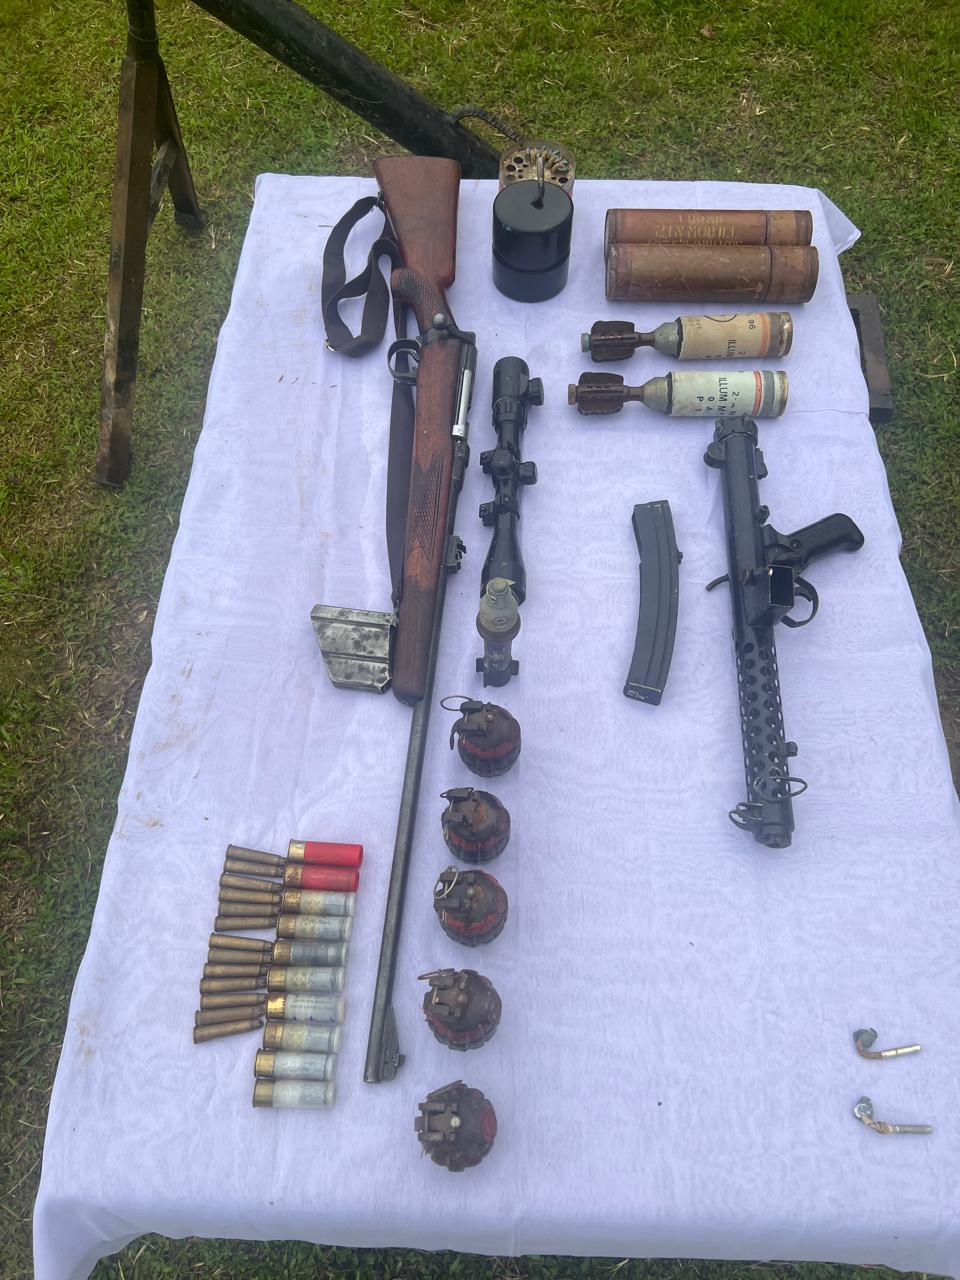 arms-and-explosives-seized-during-joint-operations-in-bishnupur-and-imphal-east-district